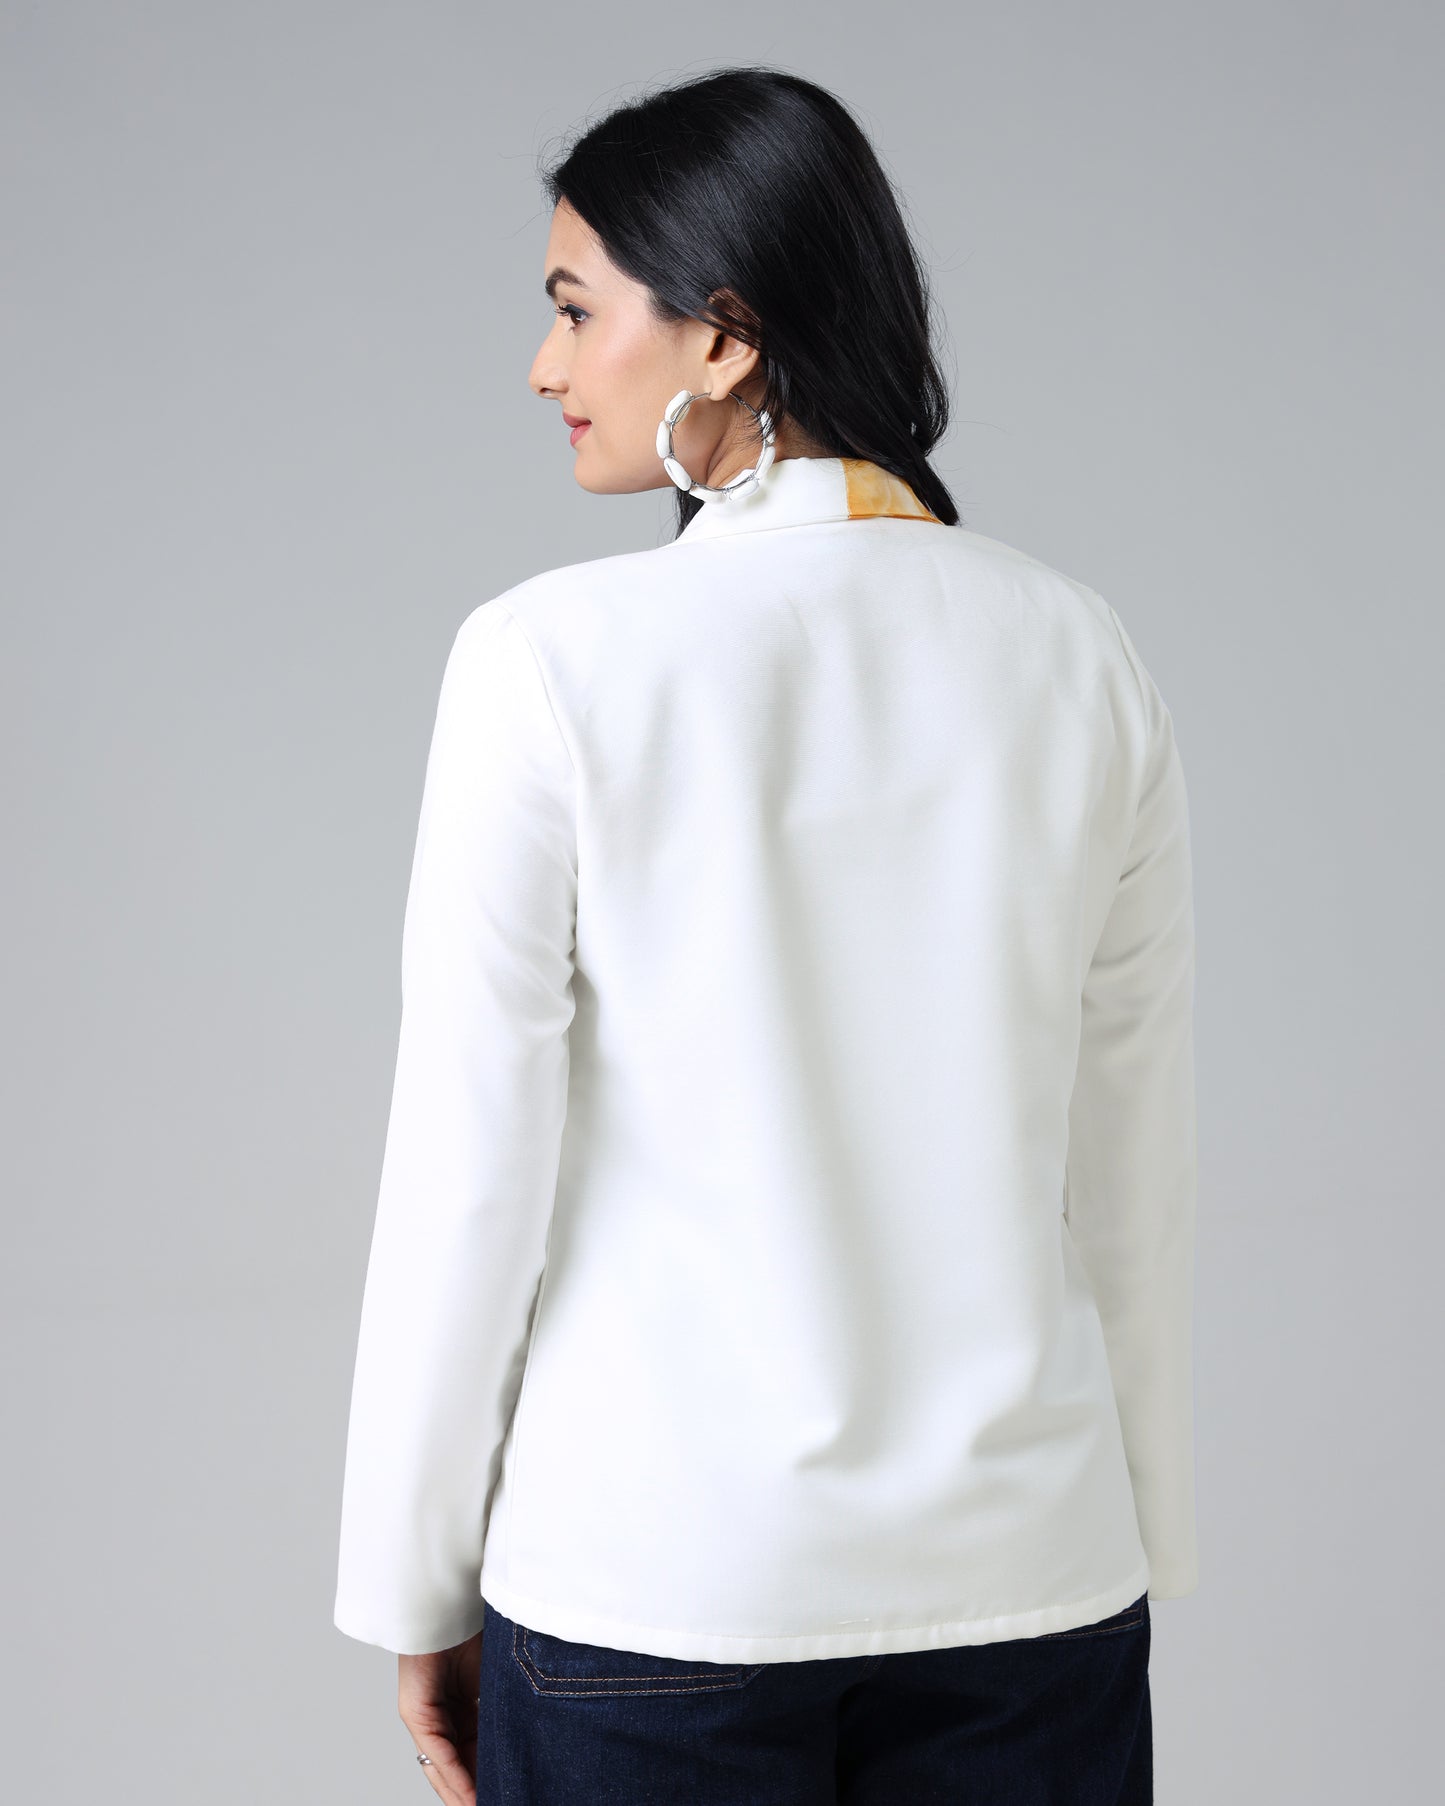 India's Pride: Freedom Edit Women's Jacket By Fabcurate